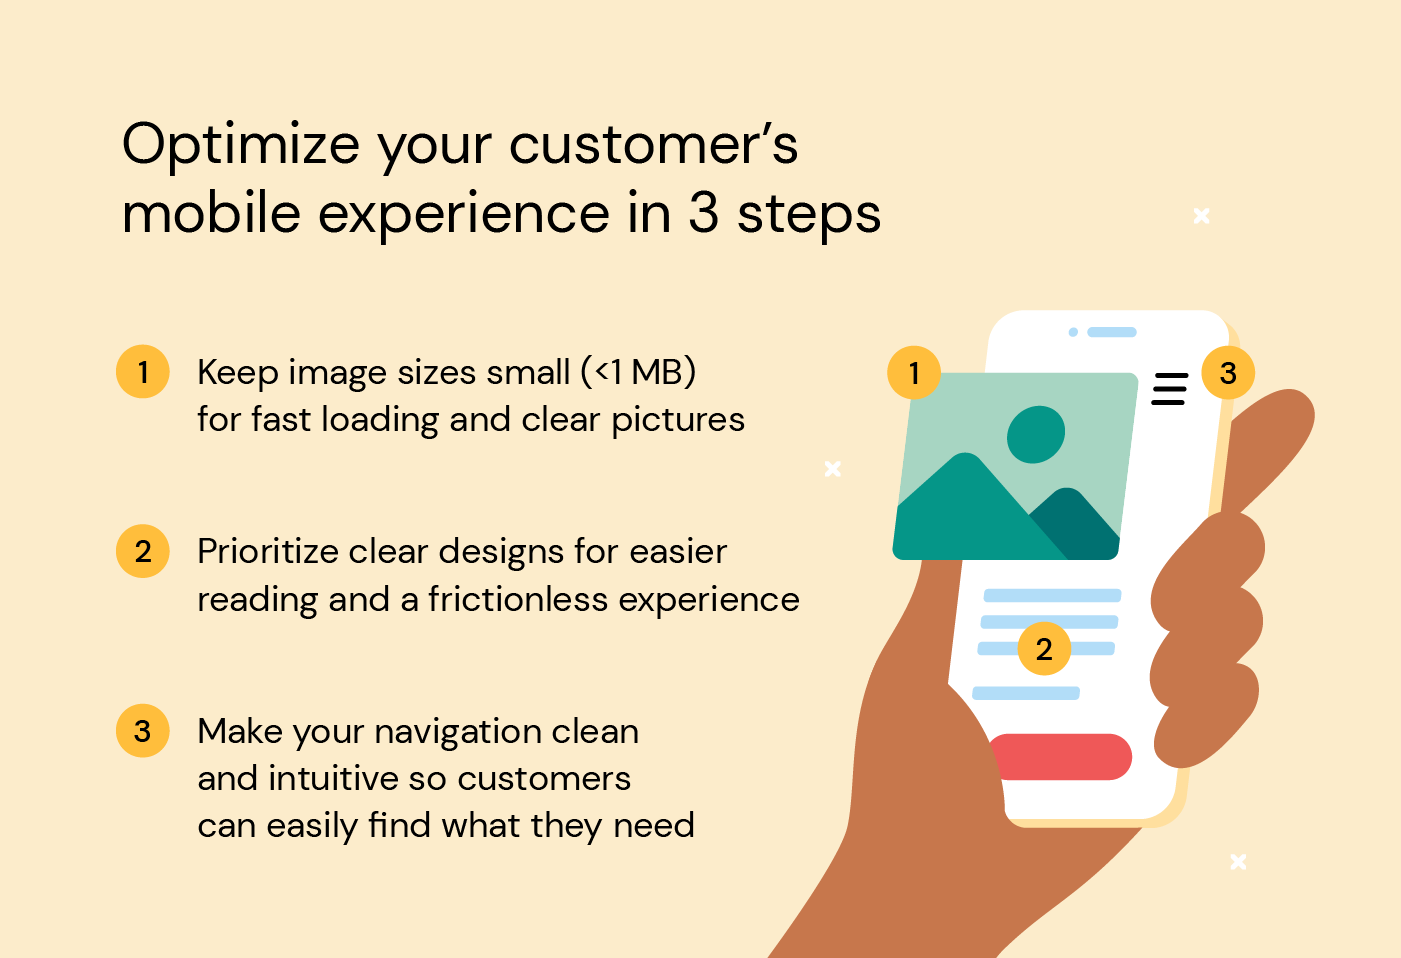 Illustration shows three steps to optimize your customer's mobile experience